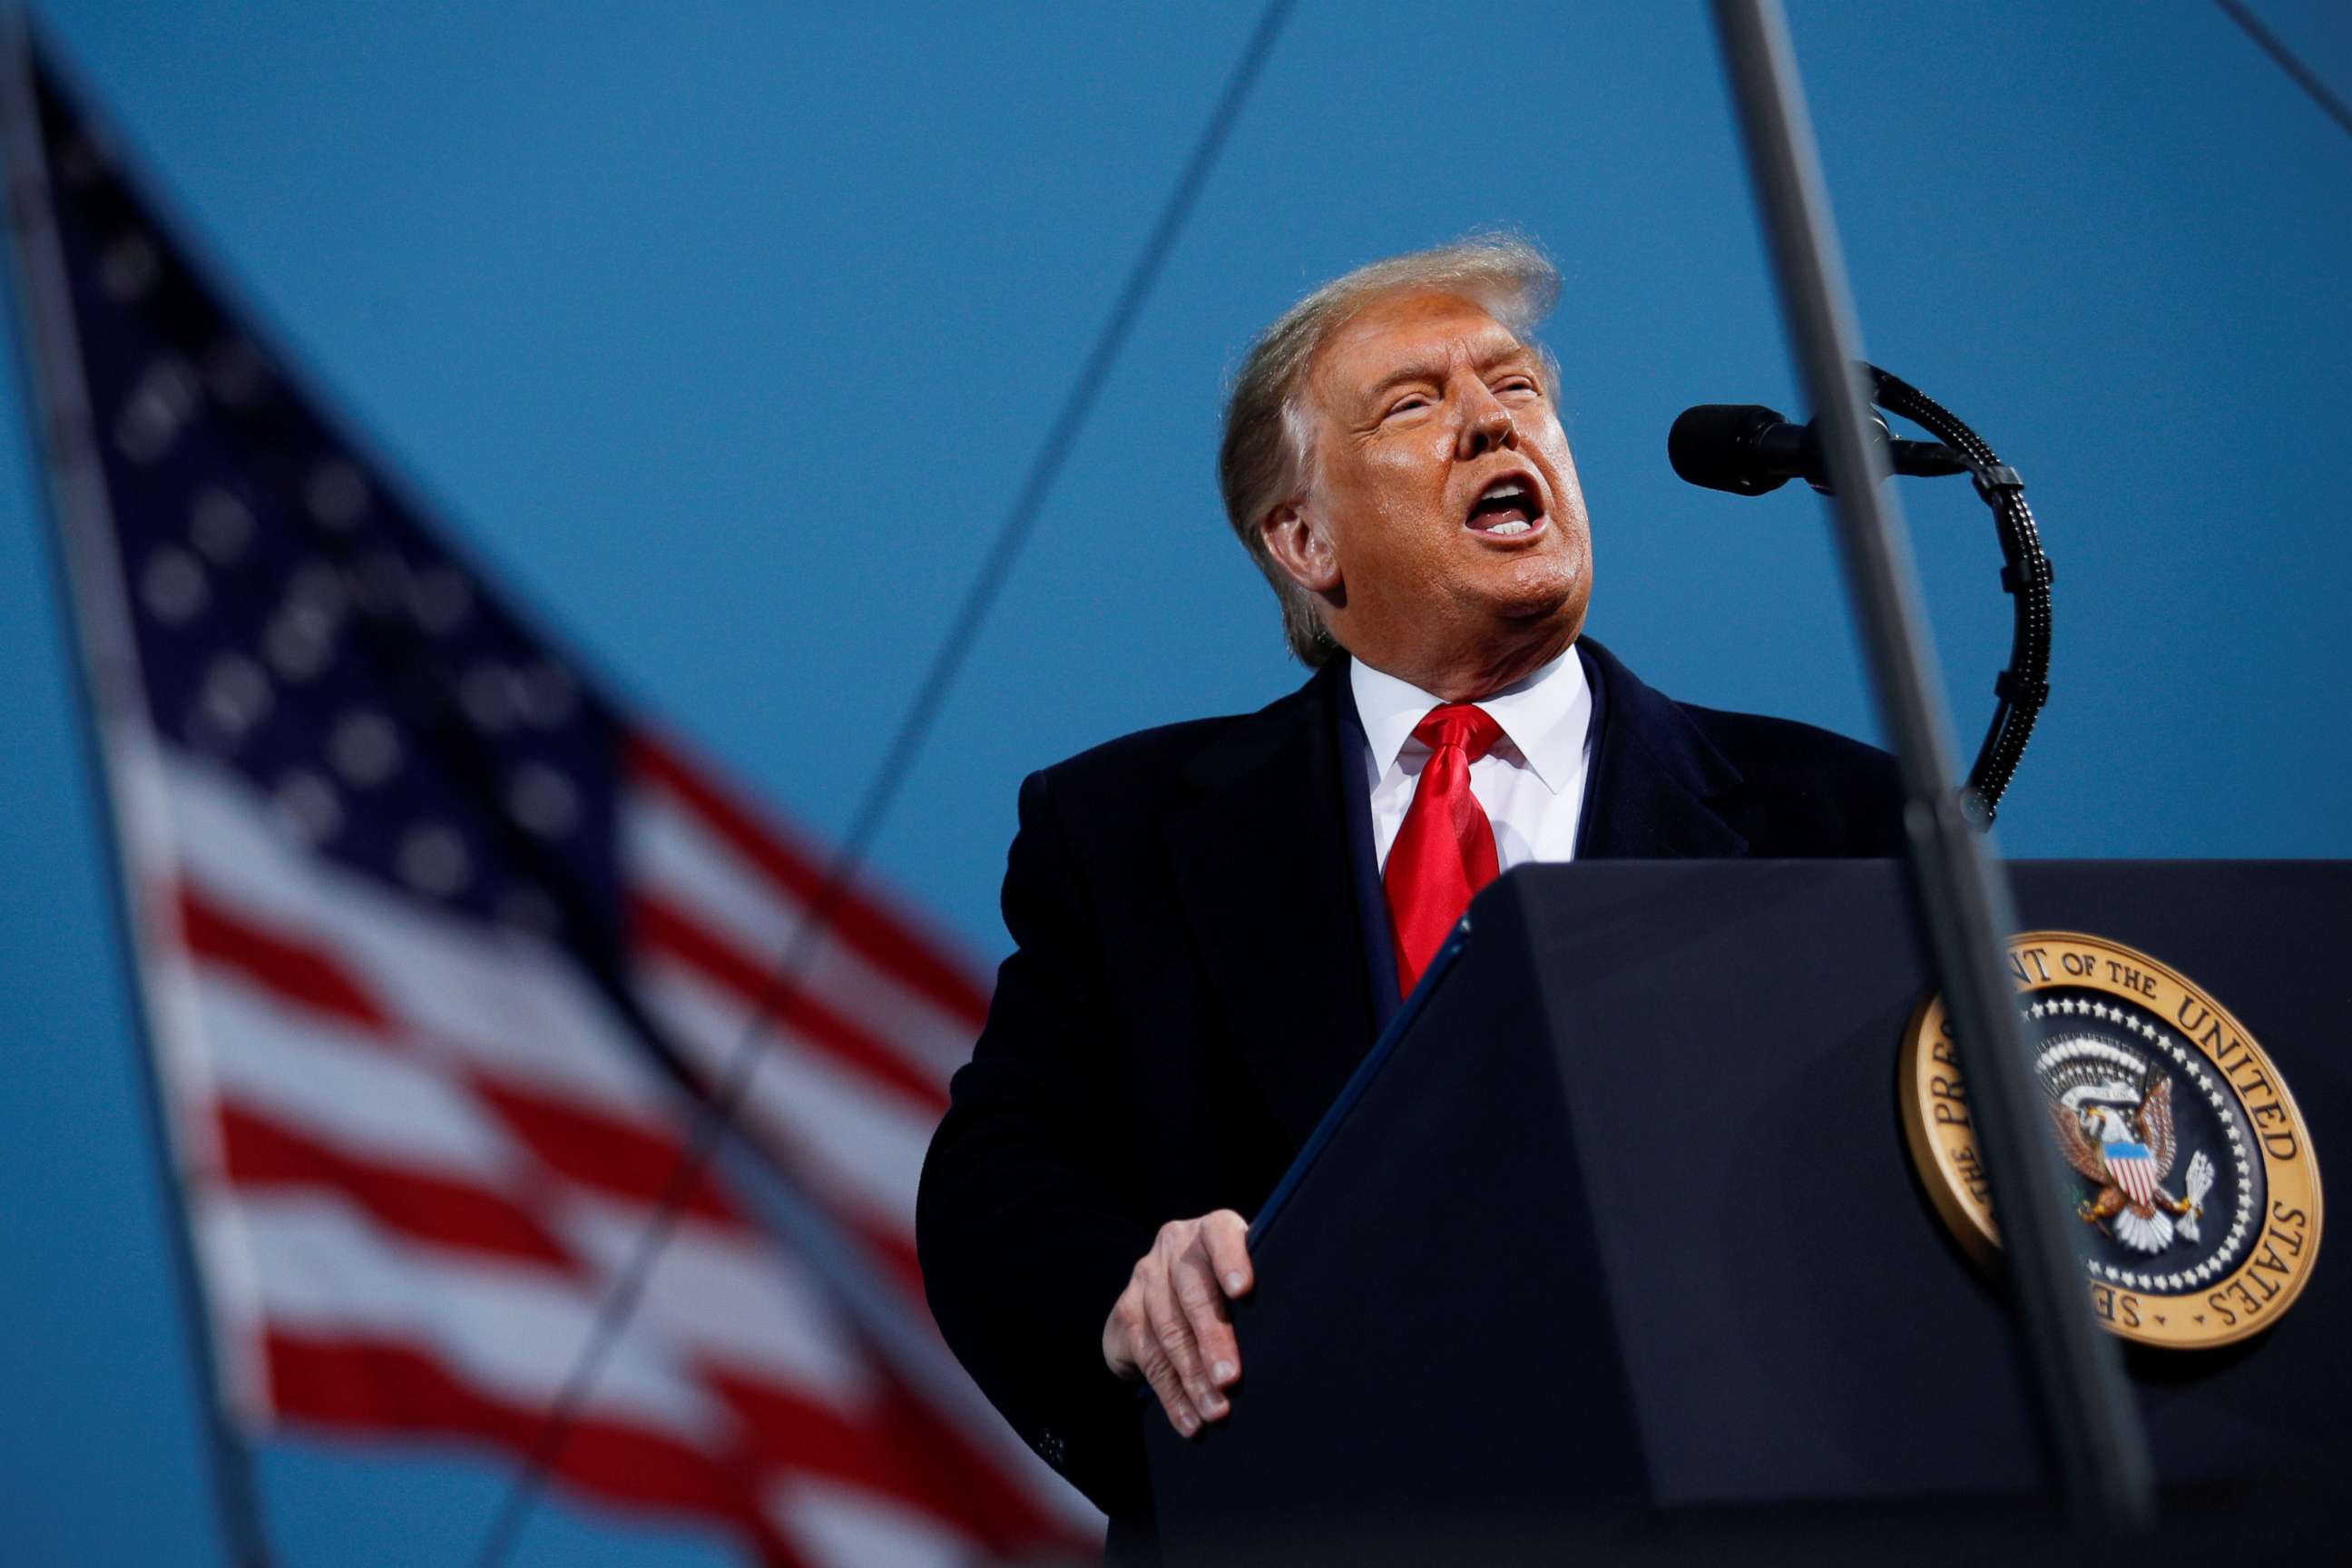 PHOTO: President Donald Trump speaks during a campaign event in Fayetteville, North Carolina, Sept. 19, 2020.